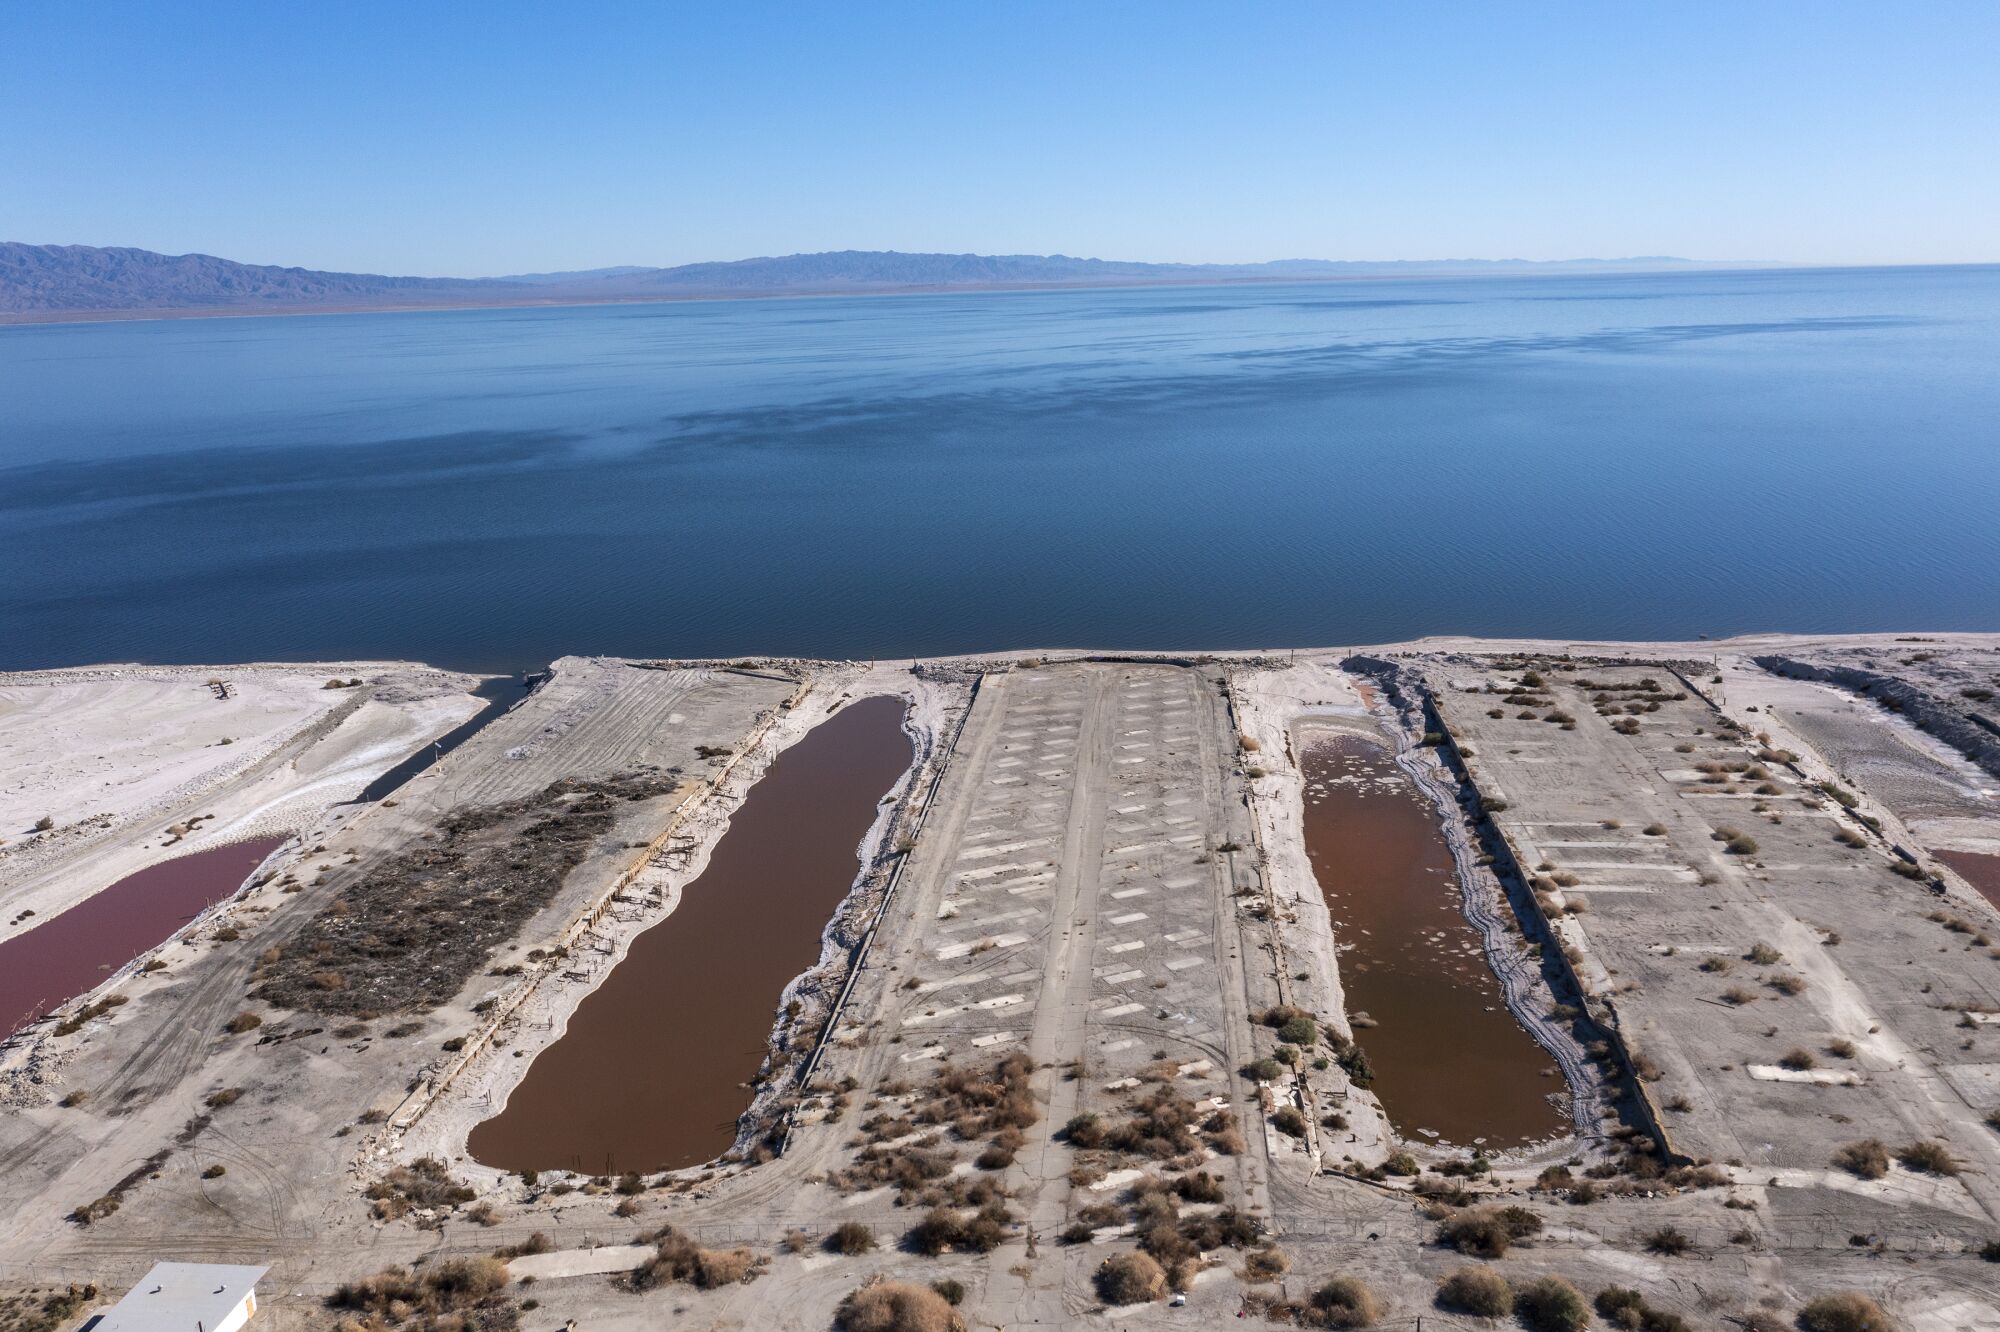 An aerial view of what's left of the Desert Shores community on the Salton Sea.